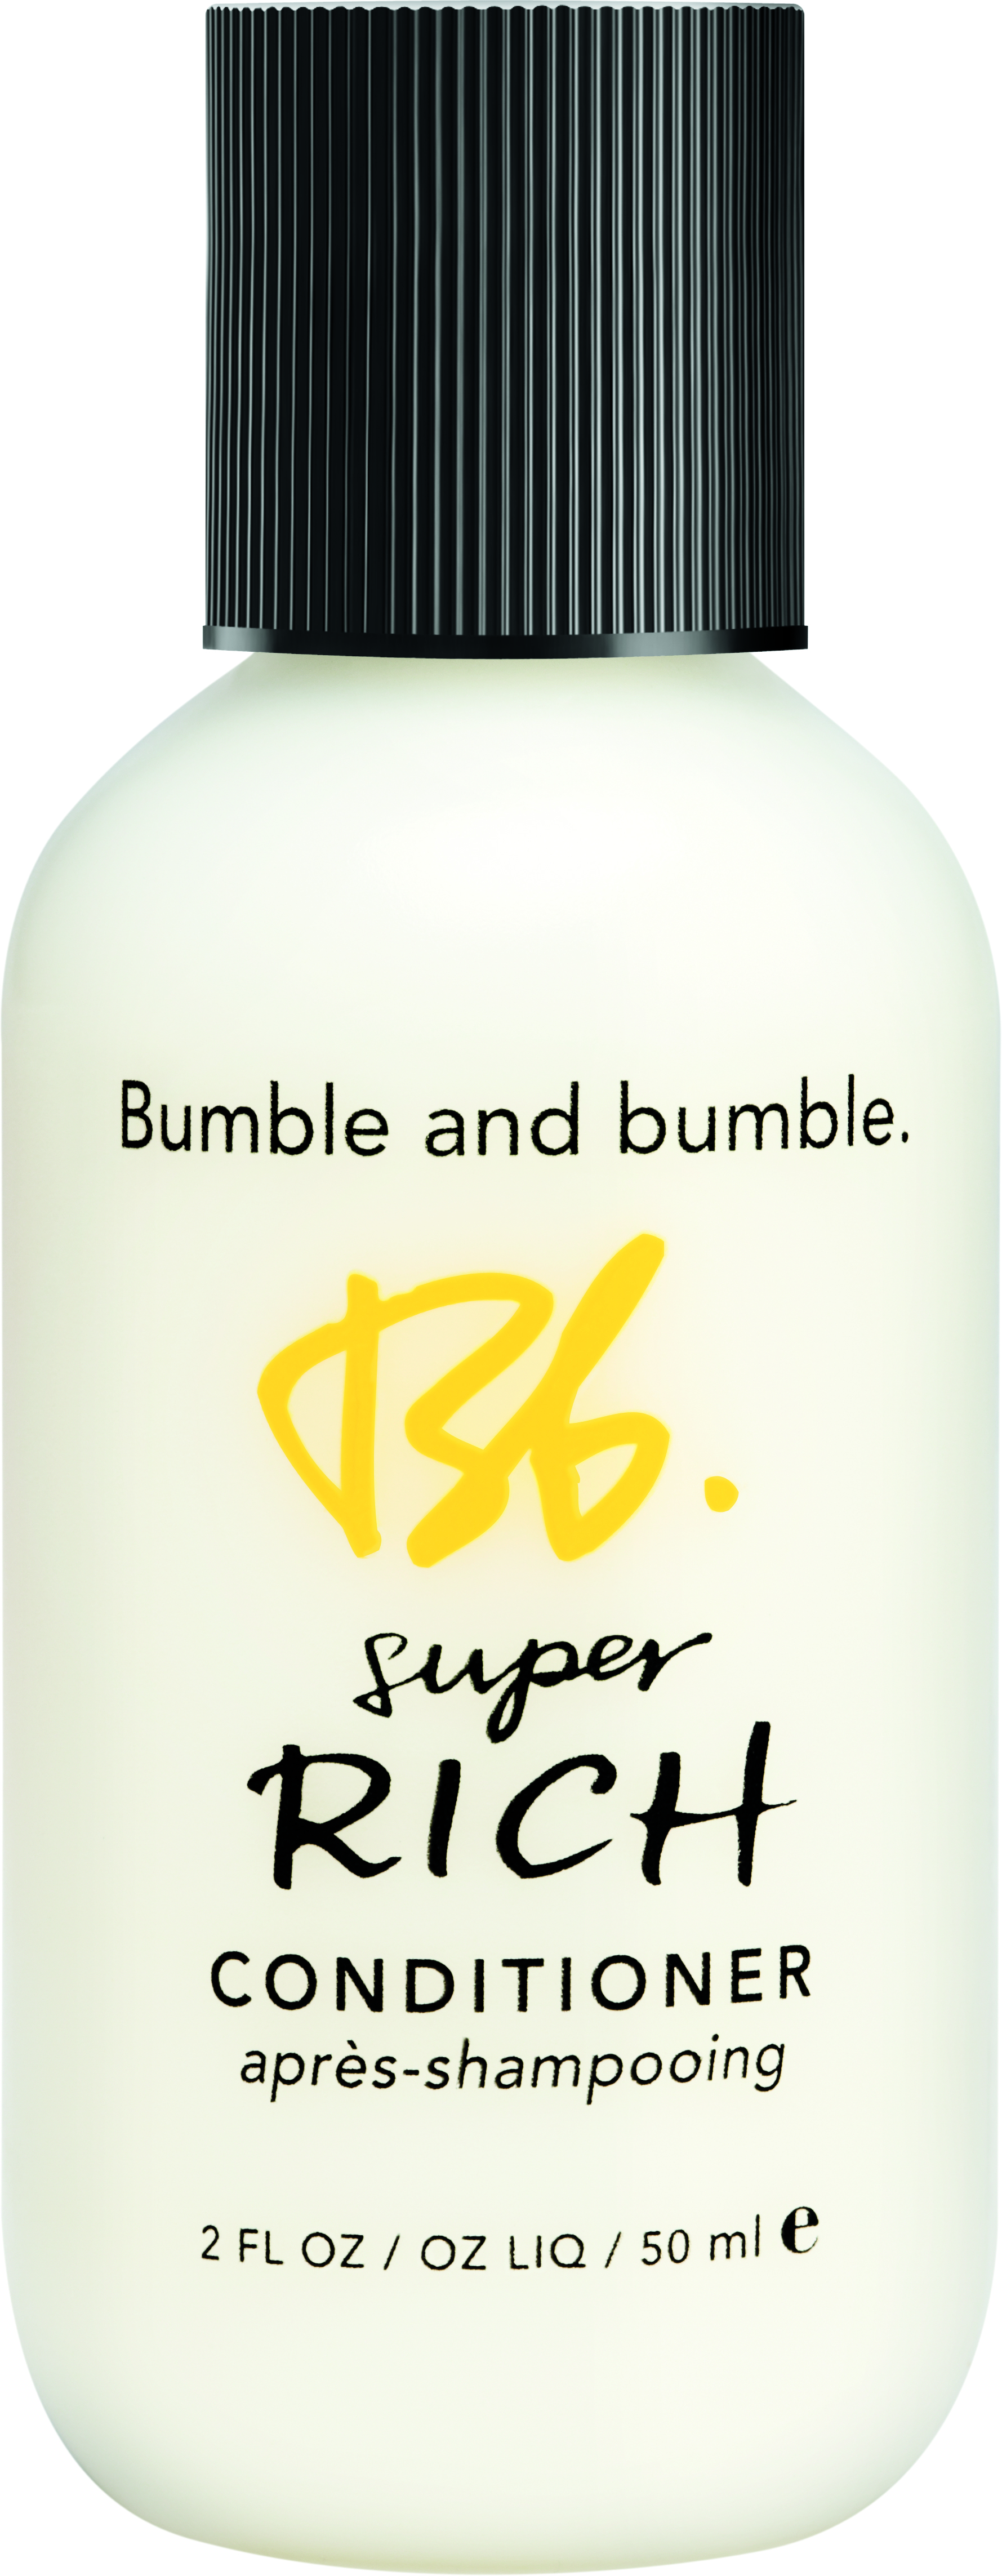 Bumble and bumble Super Rich Conditioner 50ml